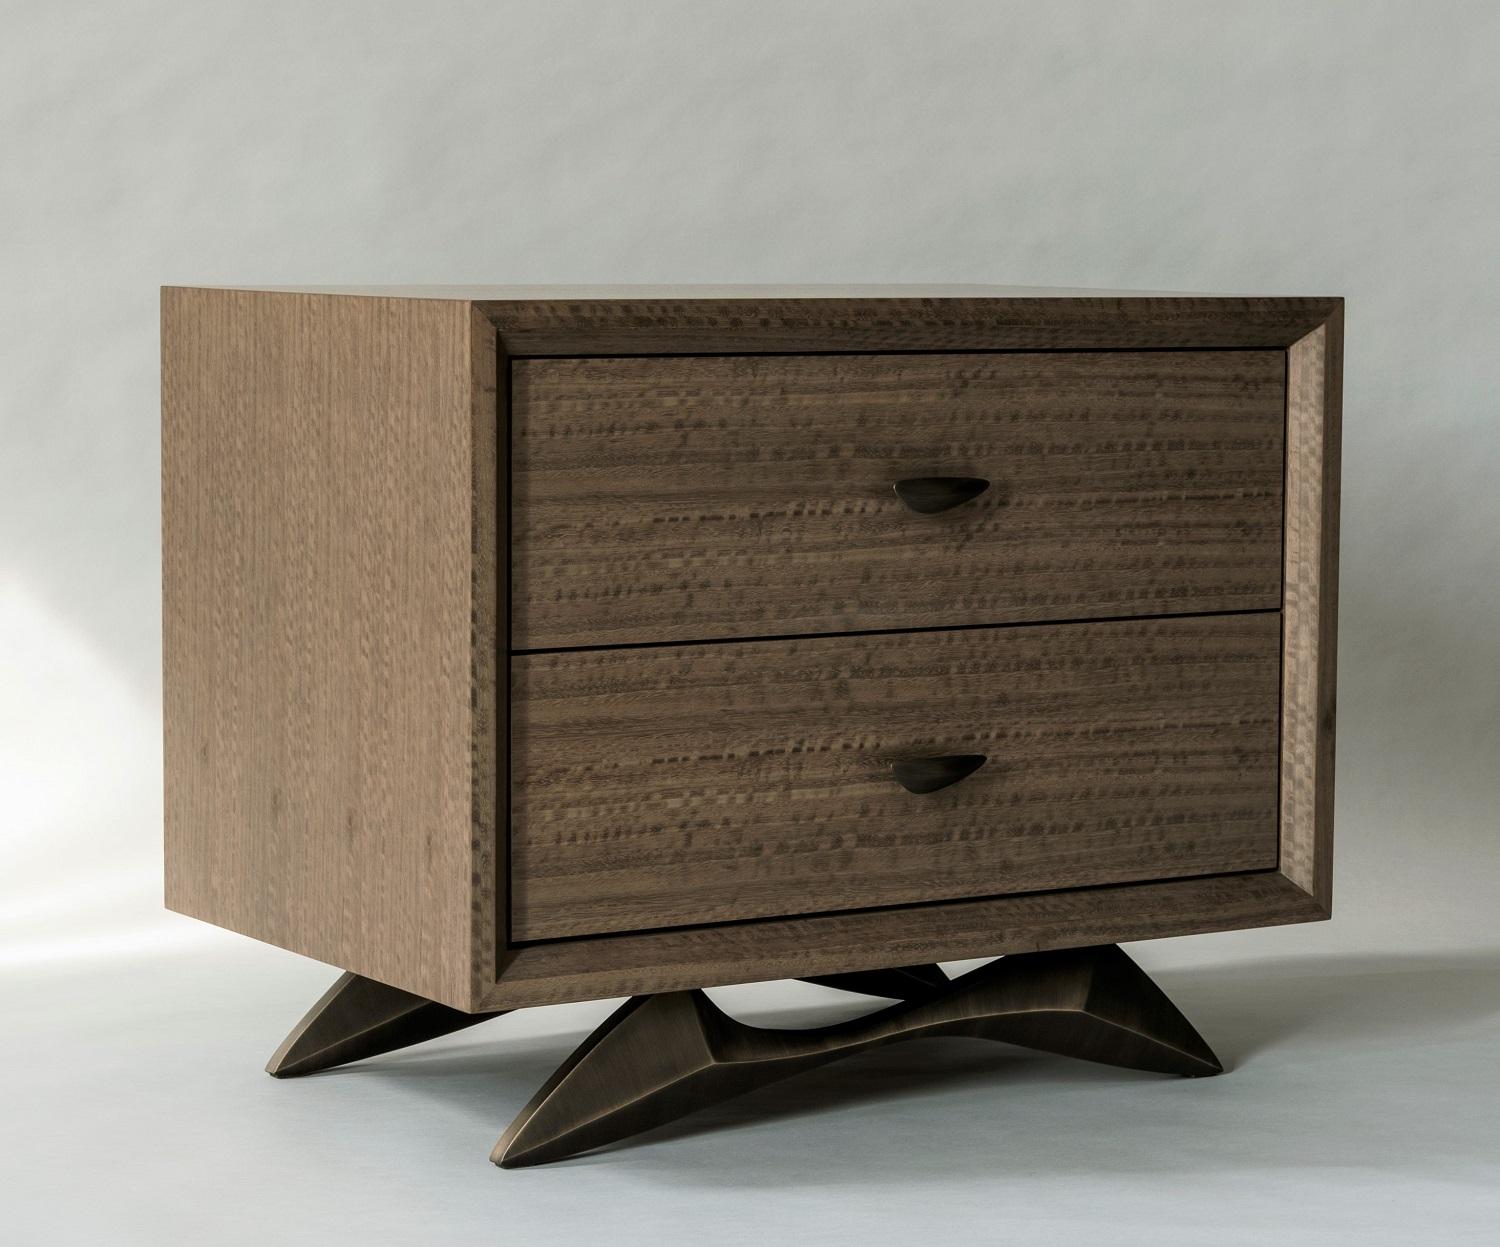 Designed as an exploration of equilibrium, the sculptural base of the Bevel Bedside Table appears to float on it's many facets. Appearing at once delicate and sturdy, the carefully balanced base supports dual drawers above.

This pair is in stock